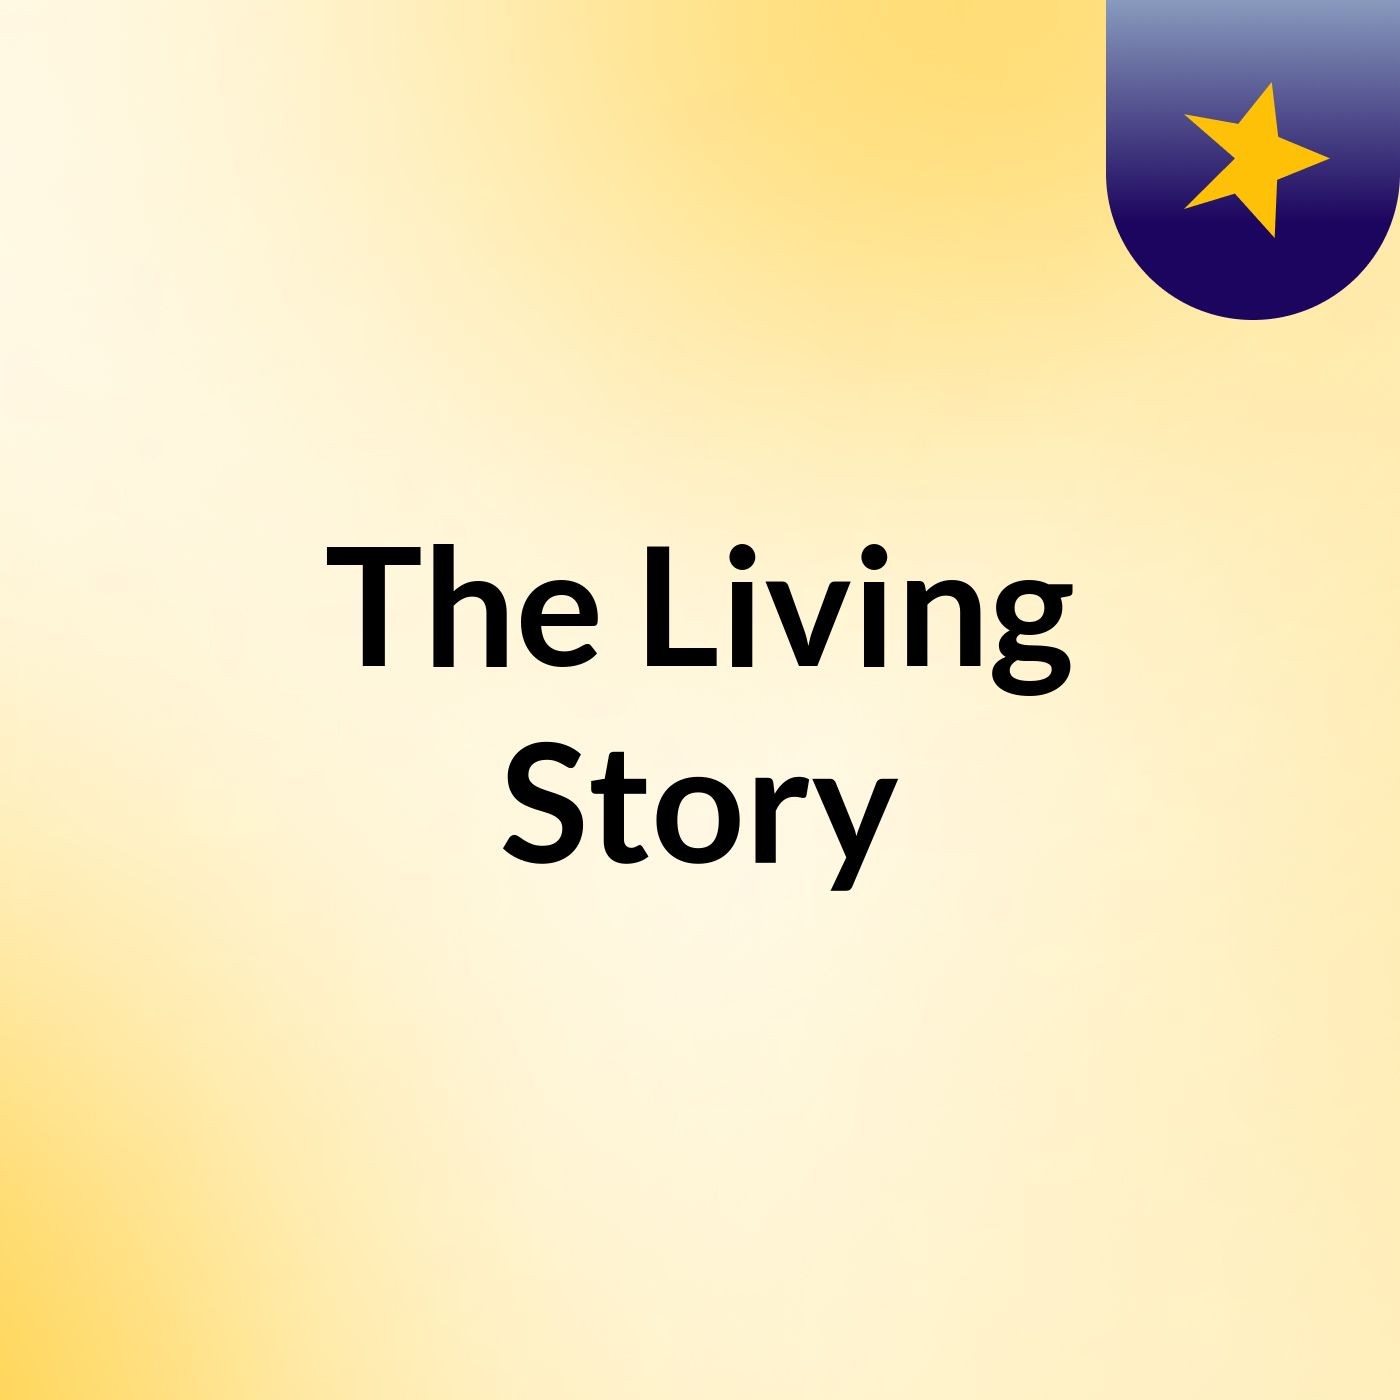 The Living Story